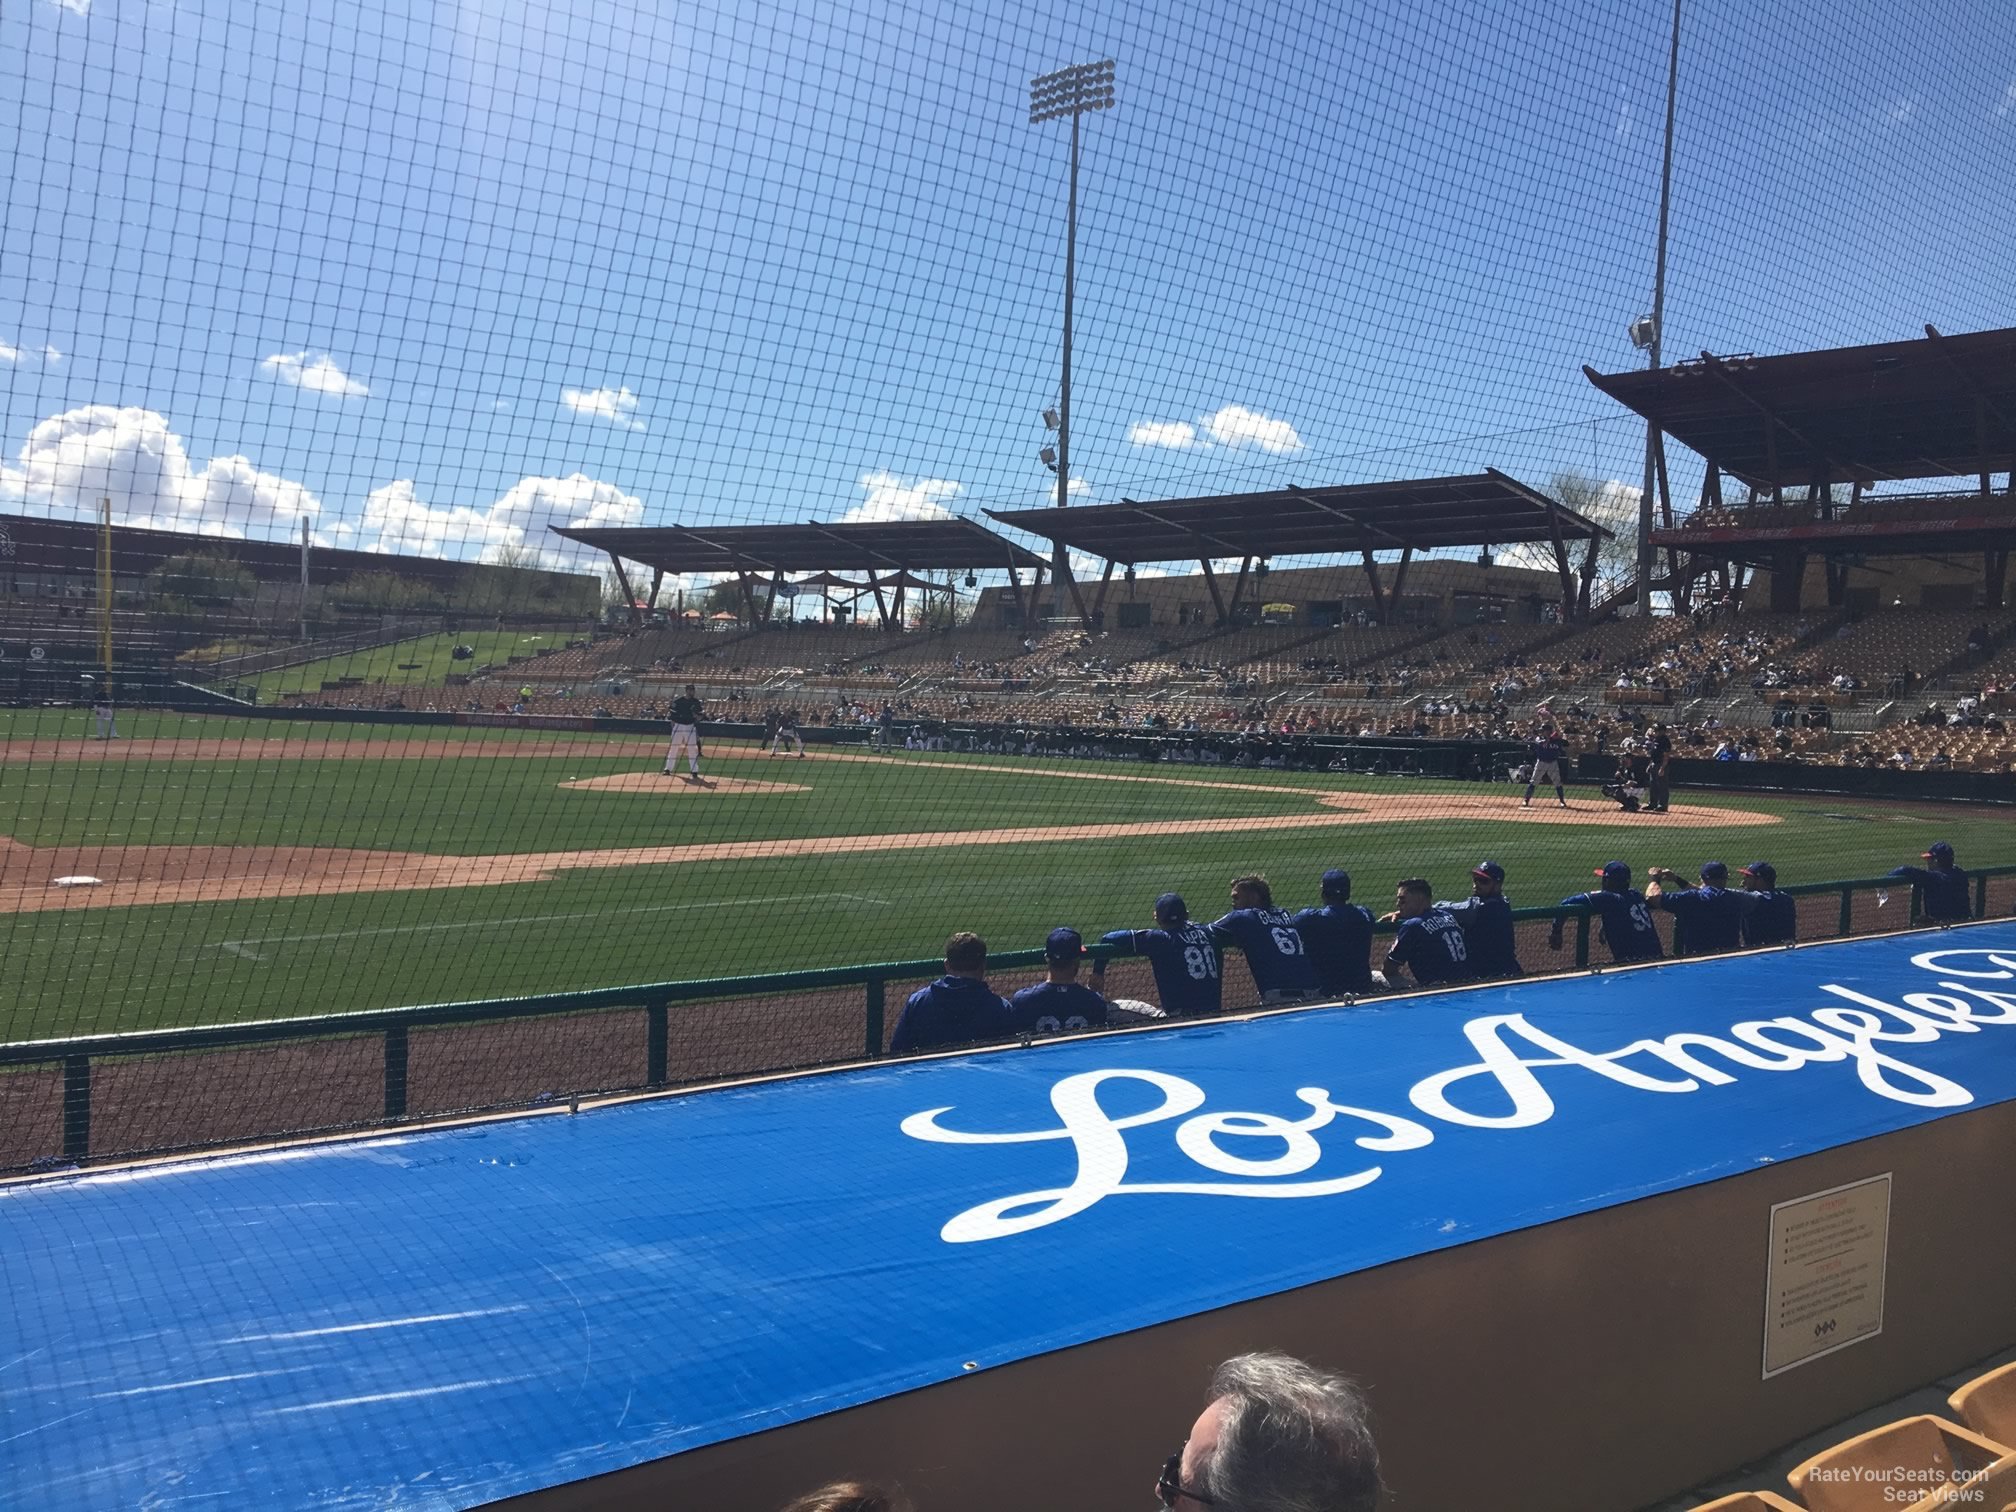 section 23, row 6 seat view  - camelback ranch